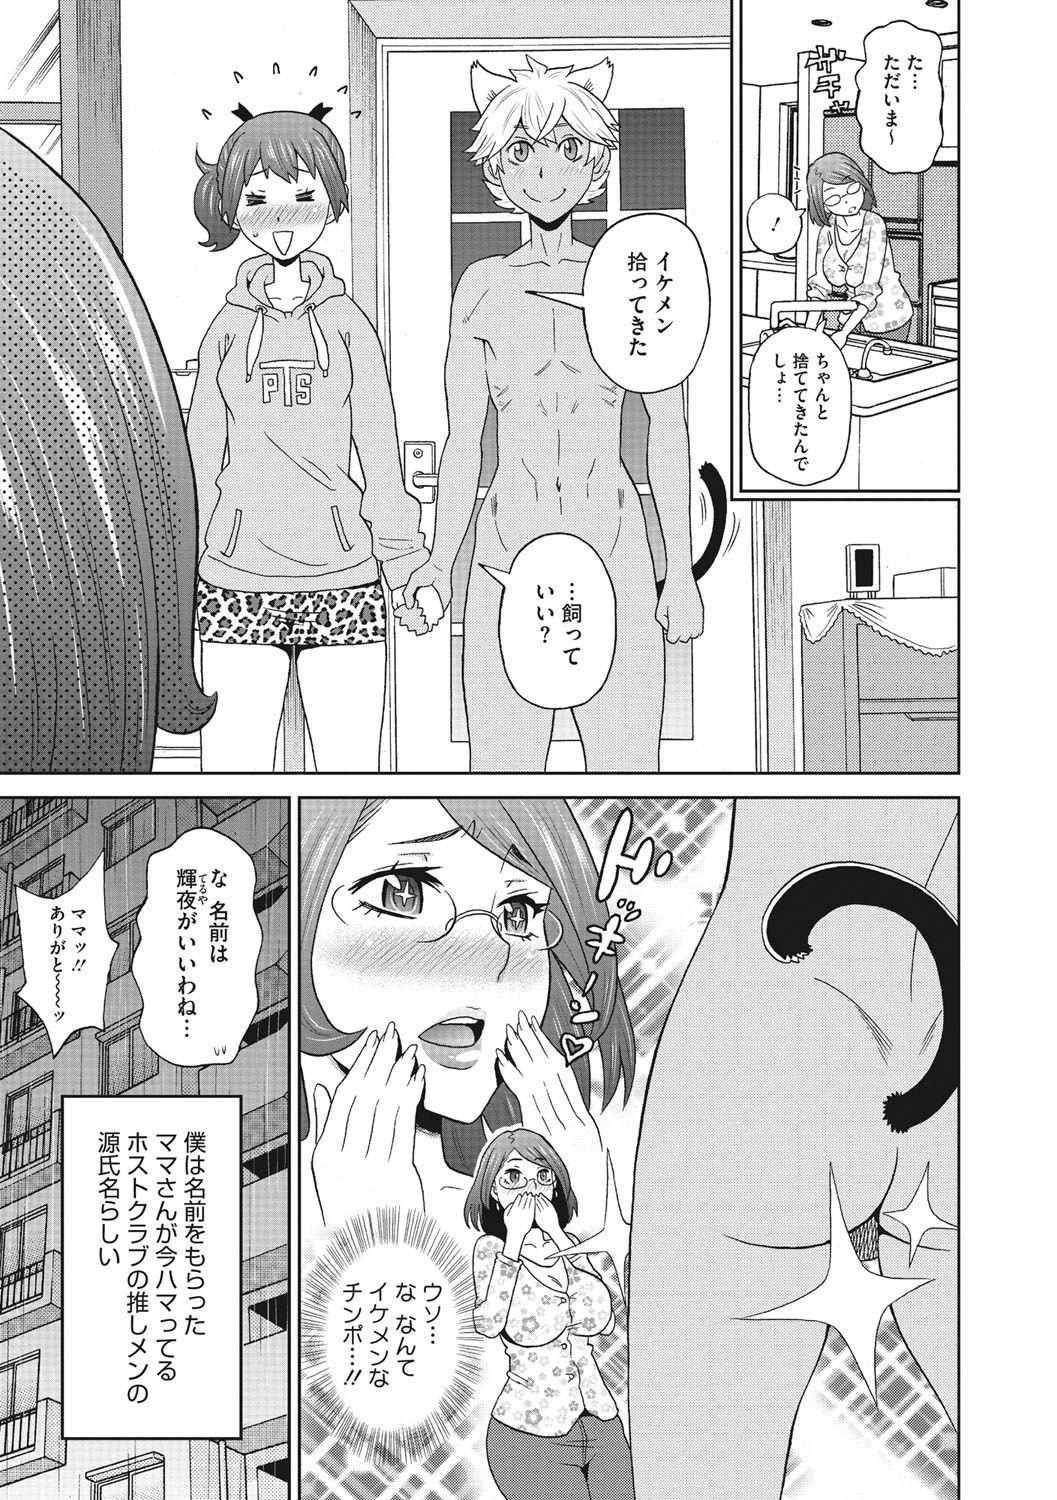 Ano Itoshiki Acmate - My Lovely Acmate Porn Blow Jobs - Page 6